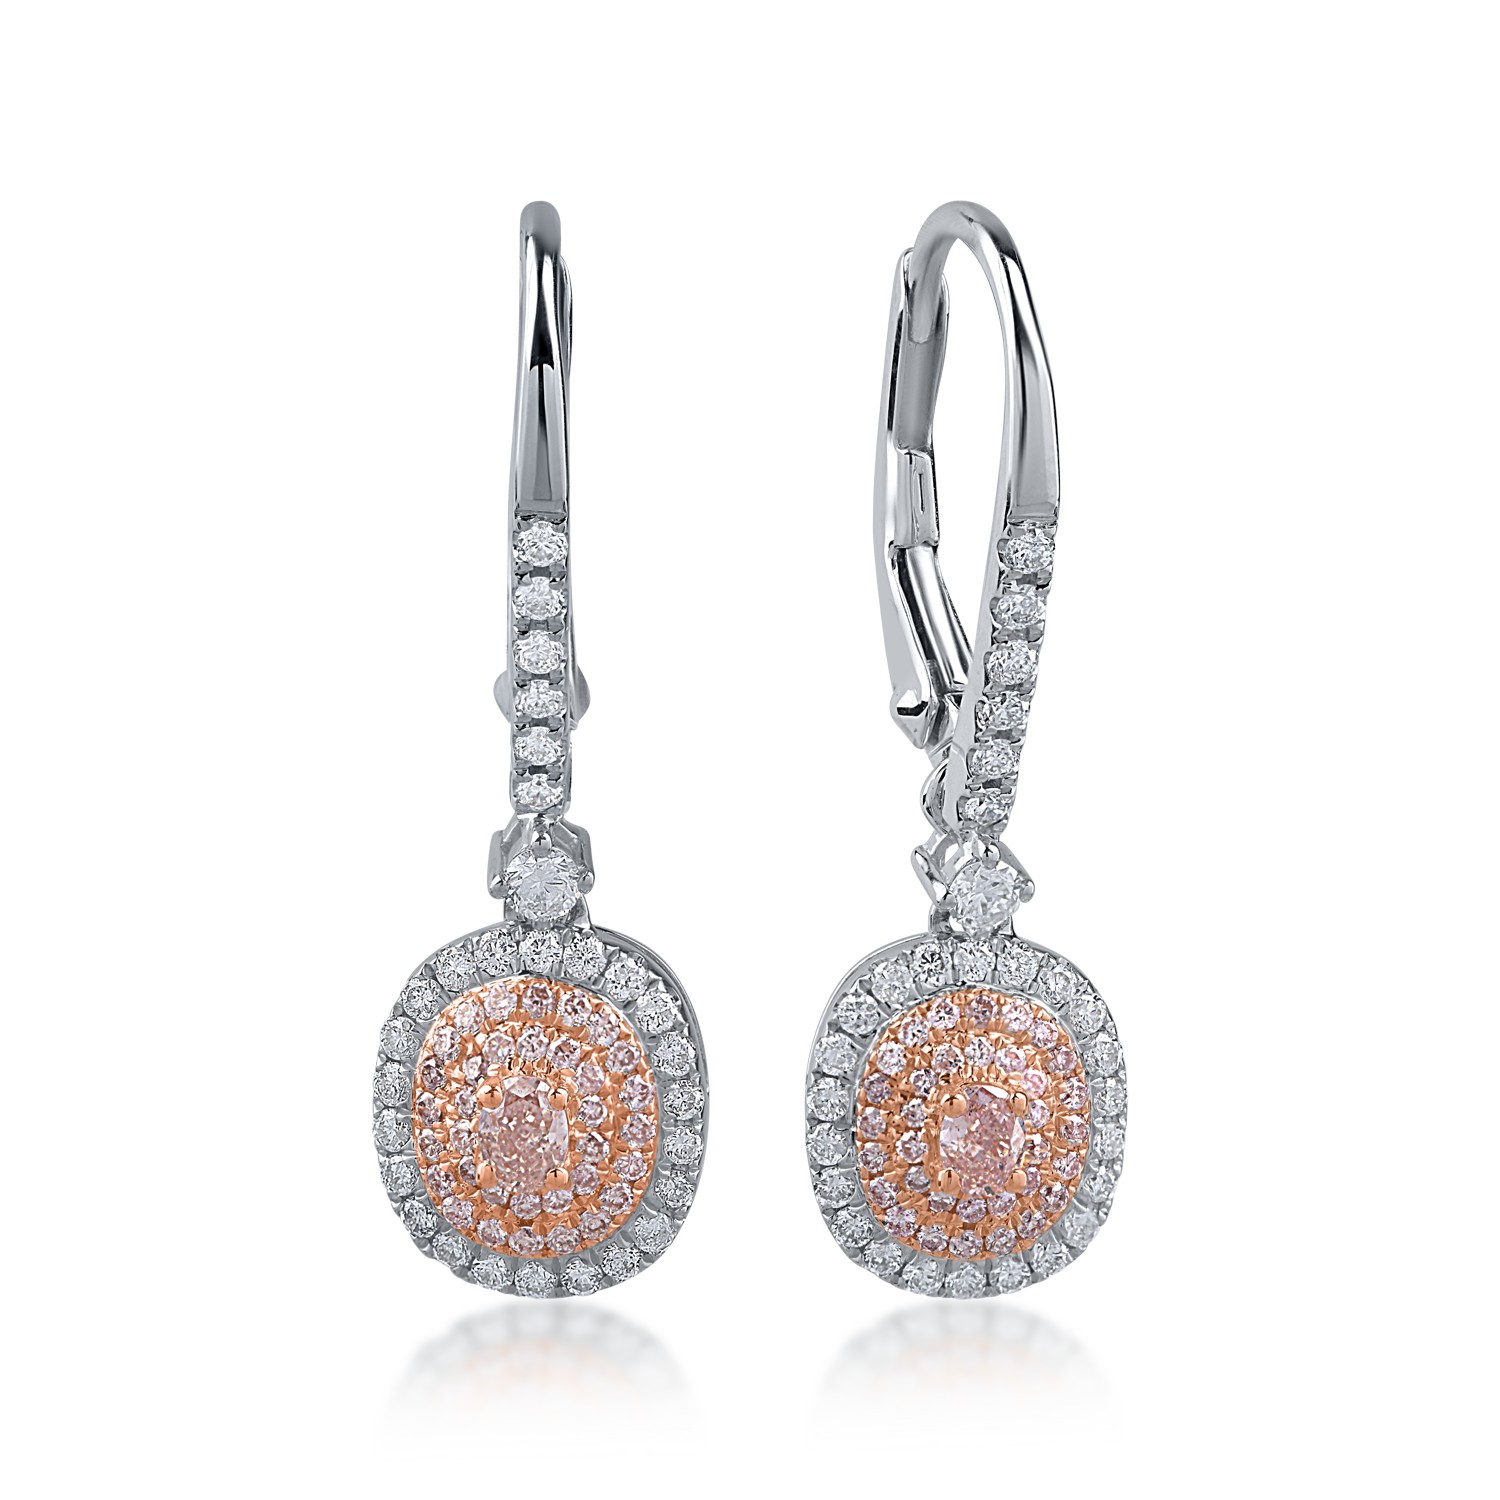 White-rose gold earrings with 0.43ct clear diamonds and 0.32ct rose diamonds